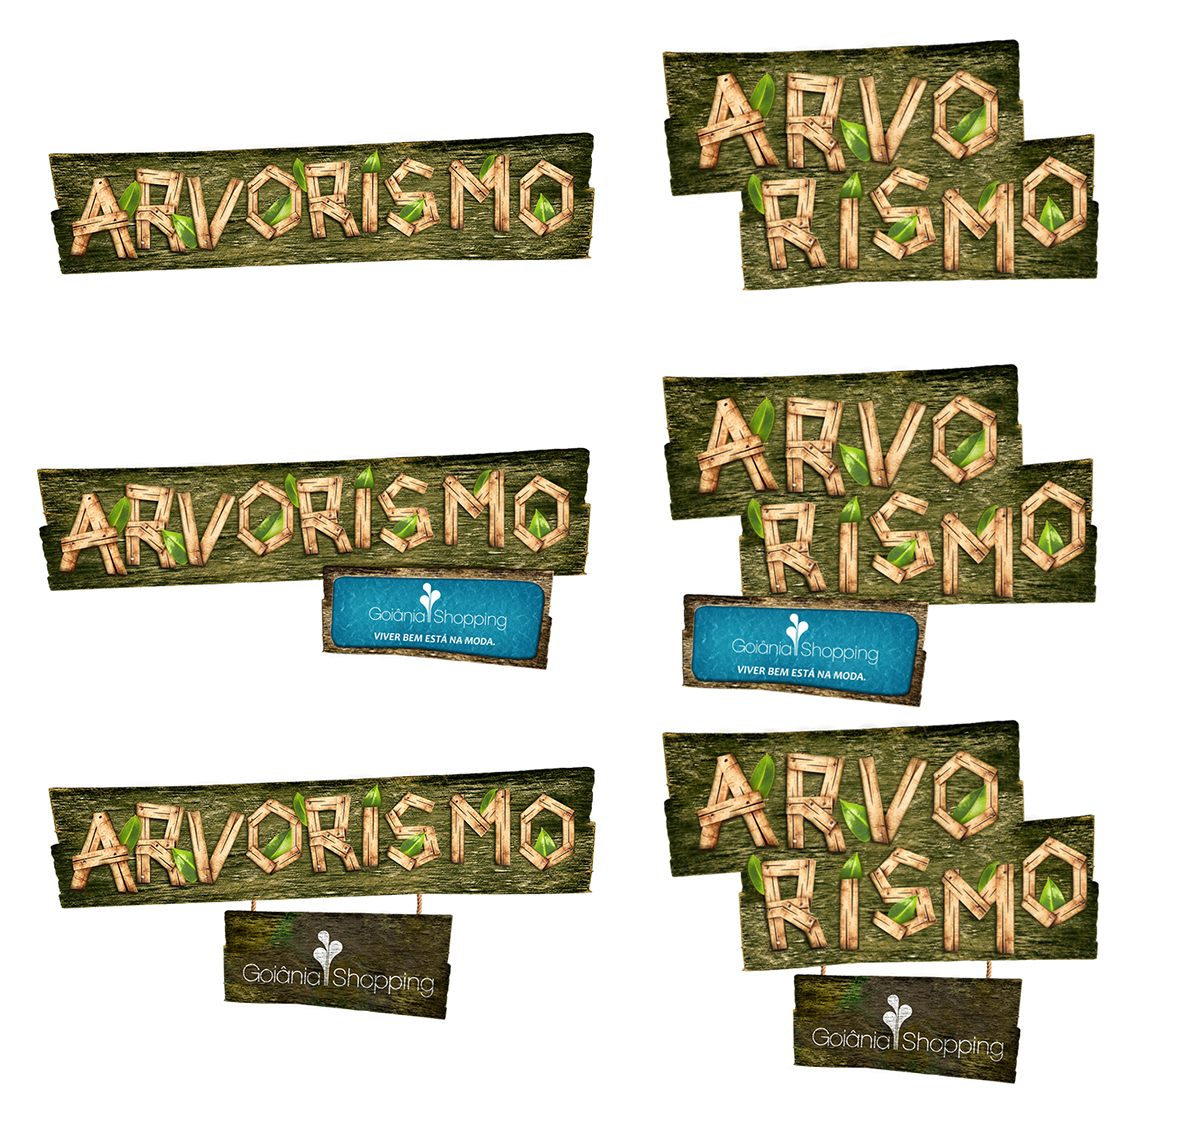 Arvorismo Shopping trees Nature retouch wood